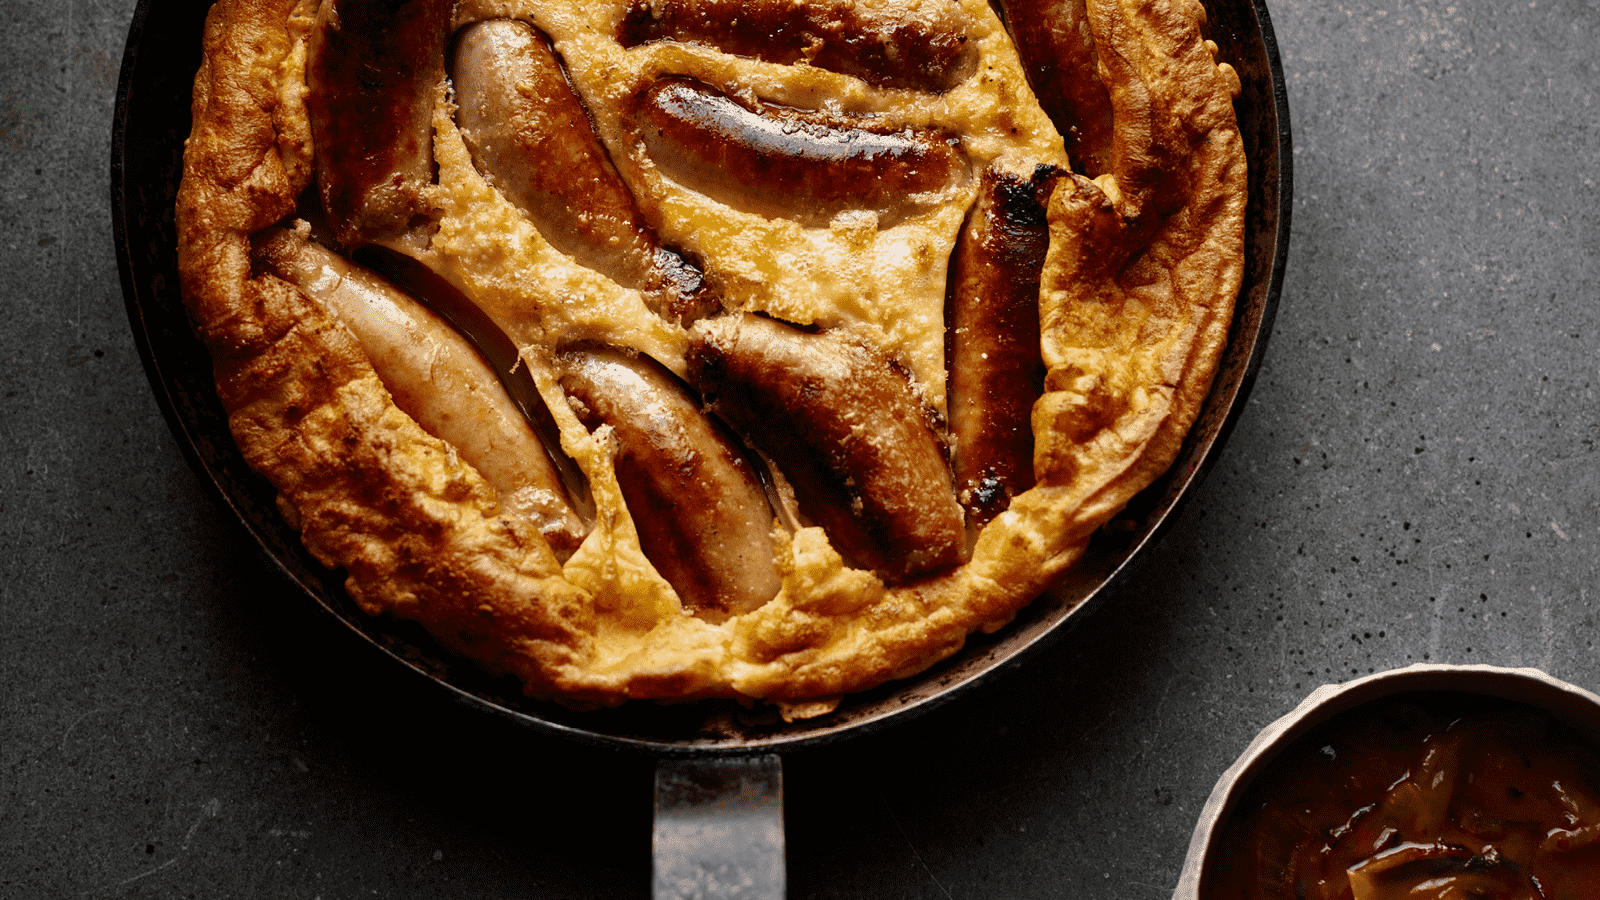 Toad in the hole cooked in a pan, sitting on a concrete worktop